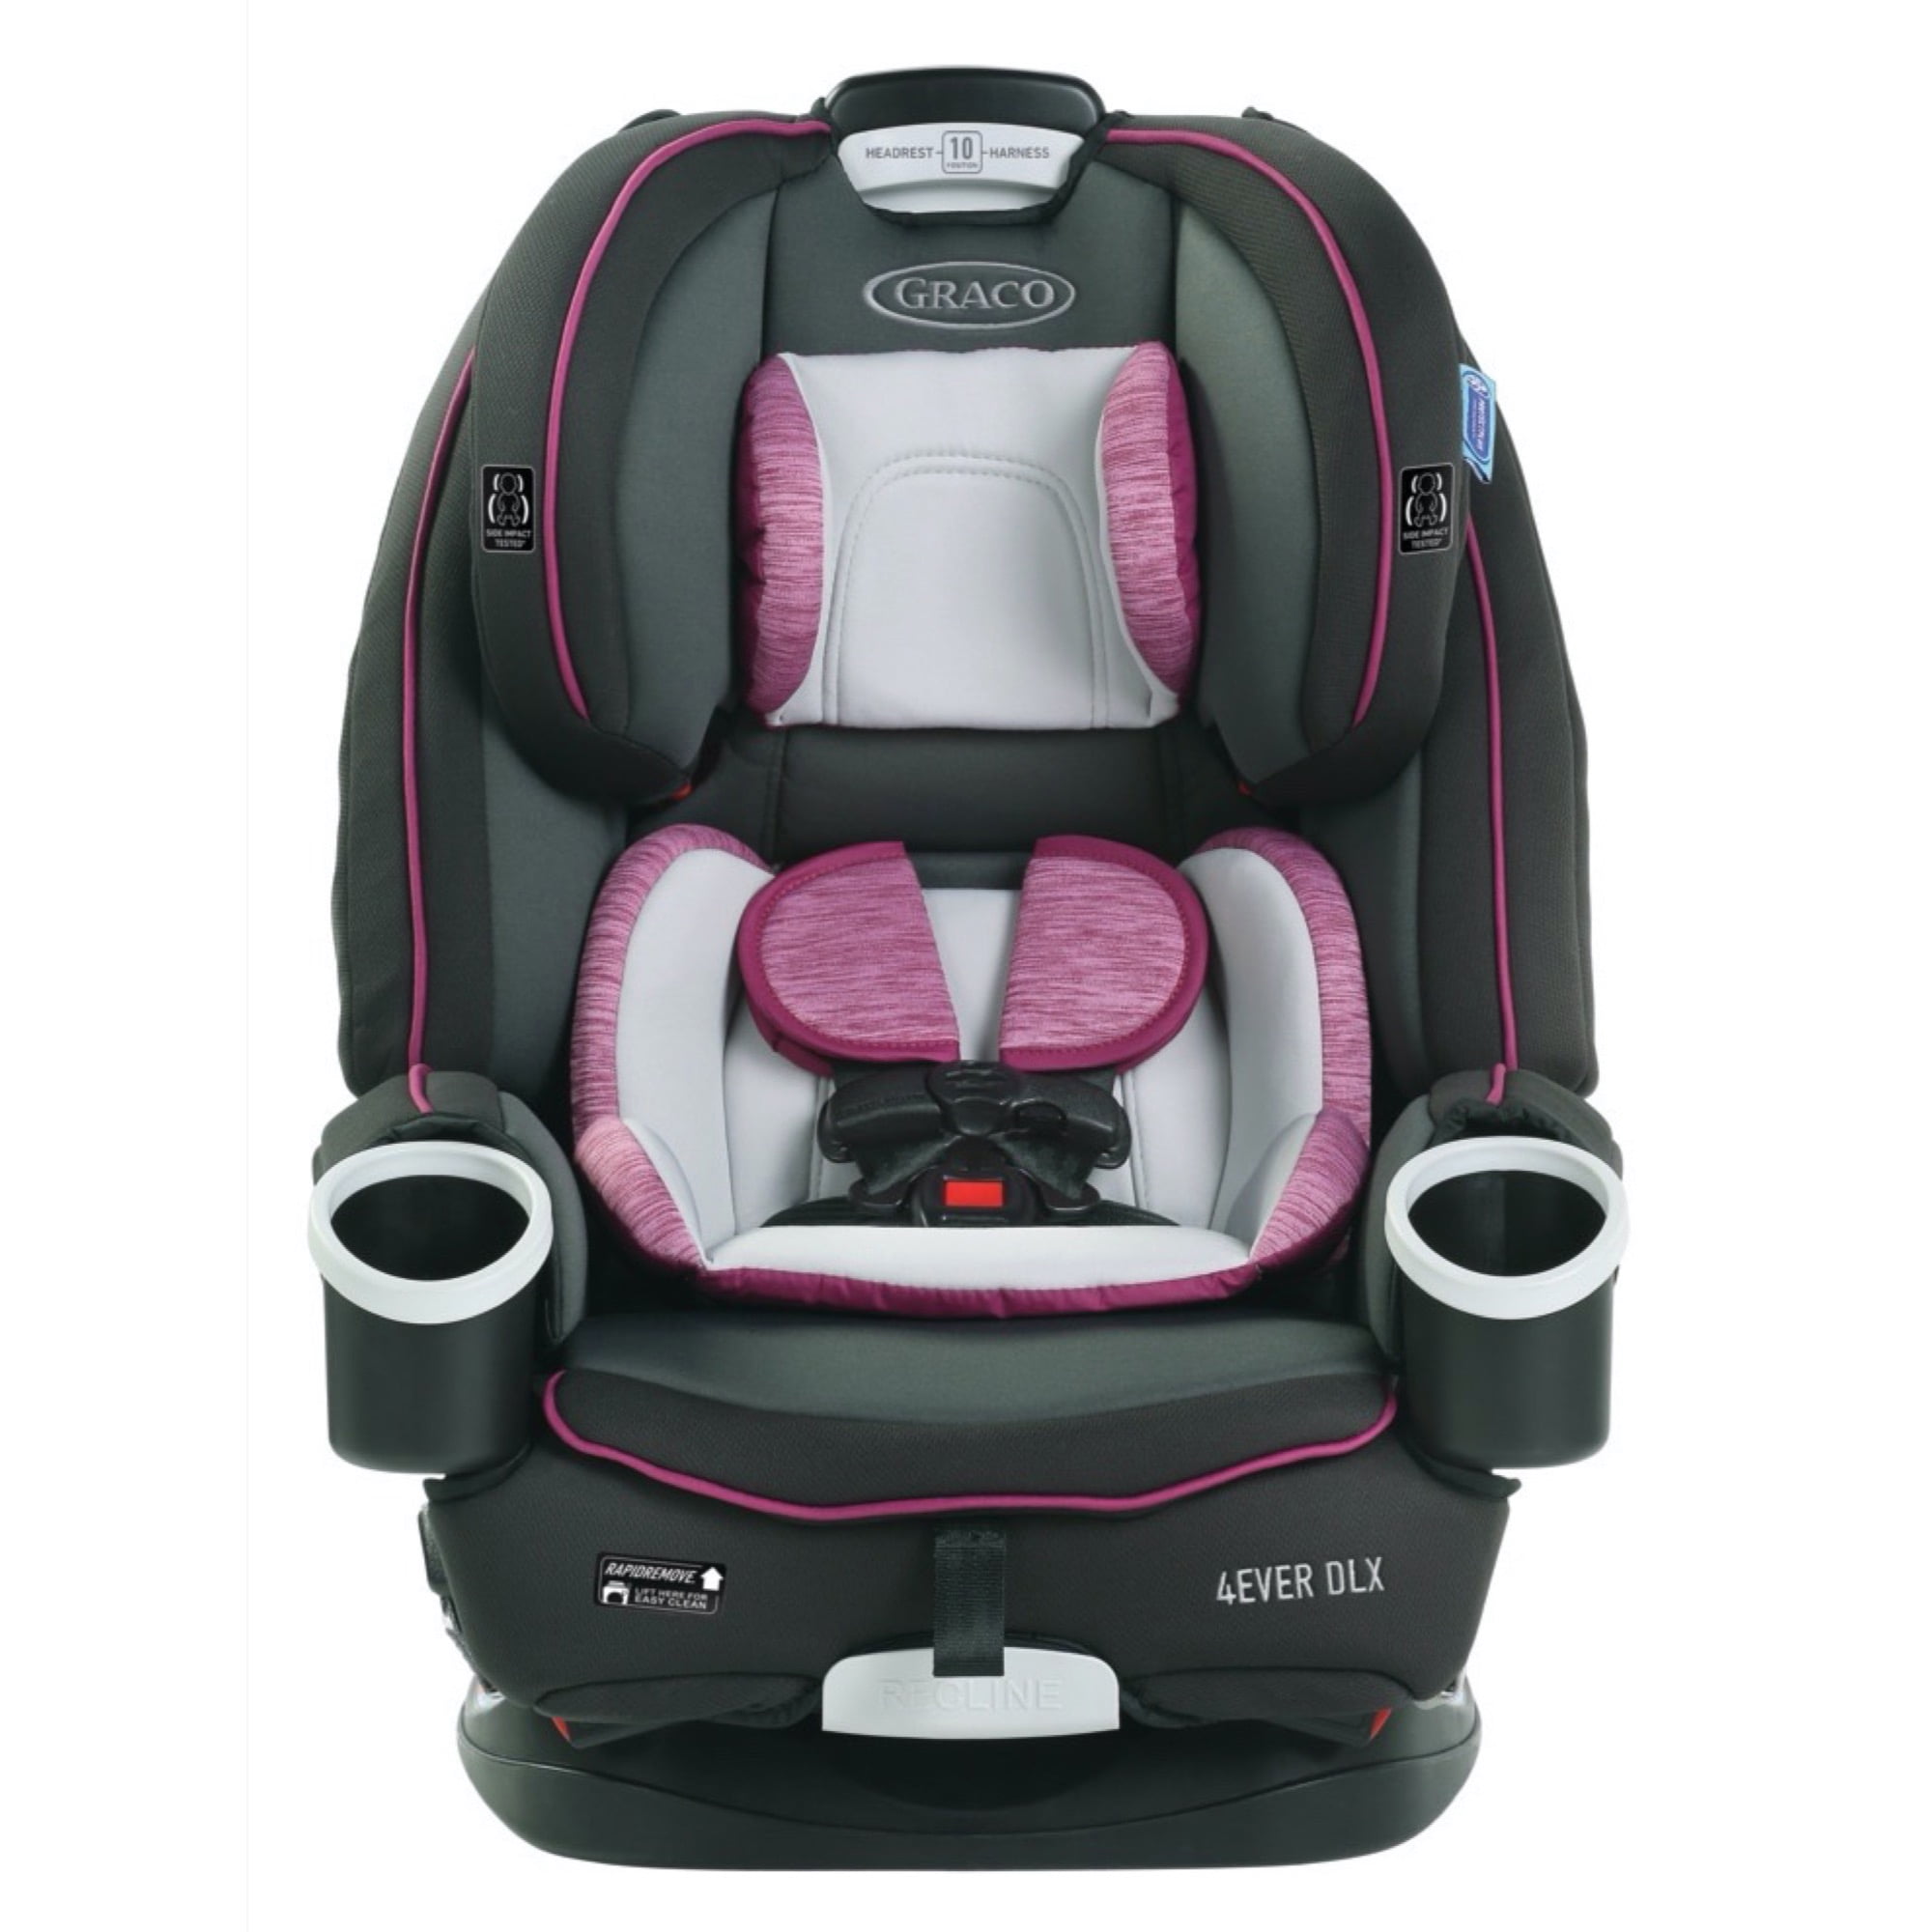 Graco Car Seat Replacement Parts - Graco Slimfit All In One Car Seat